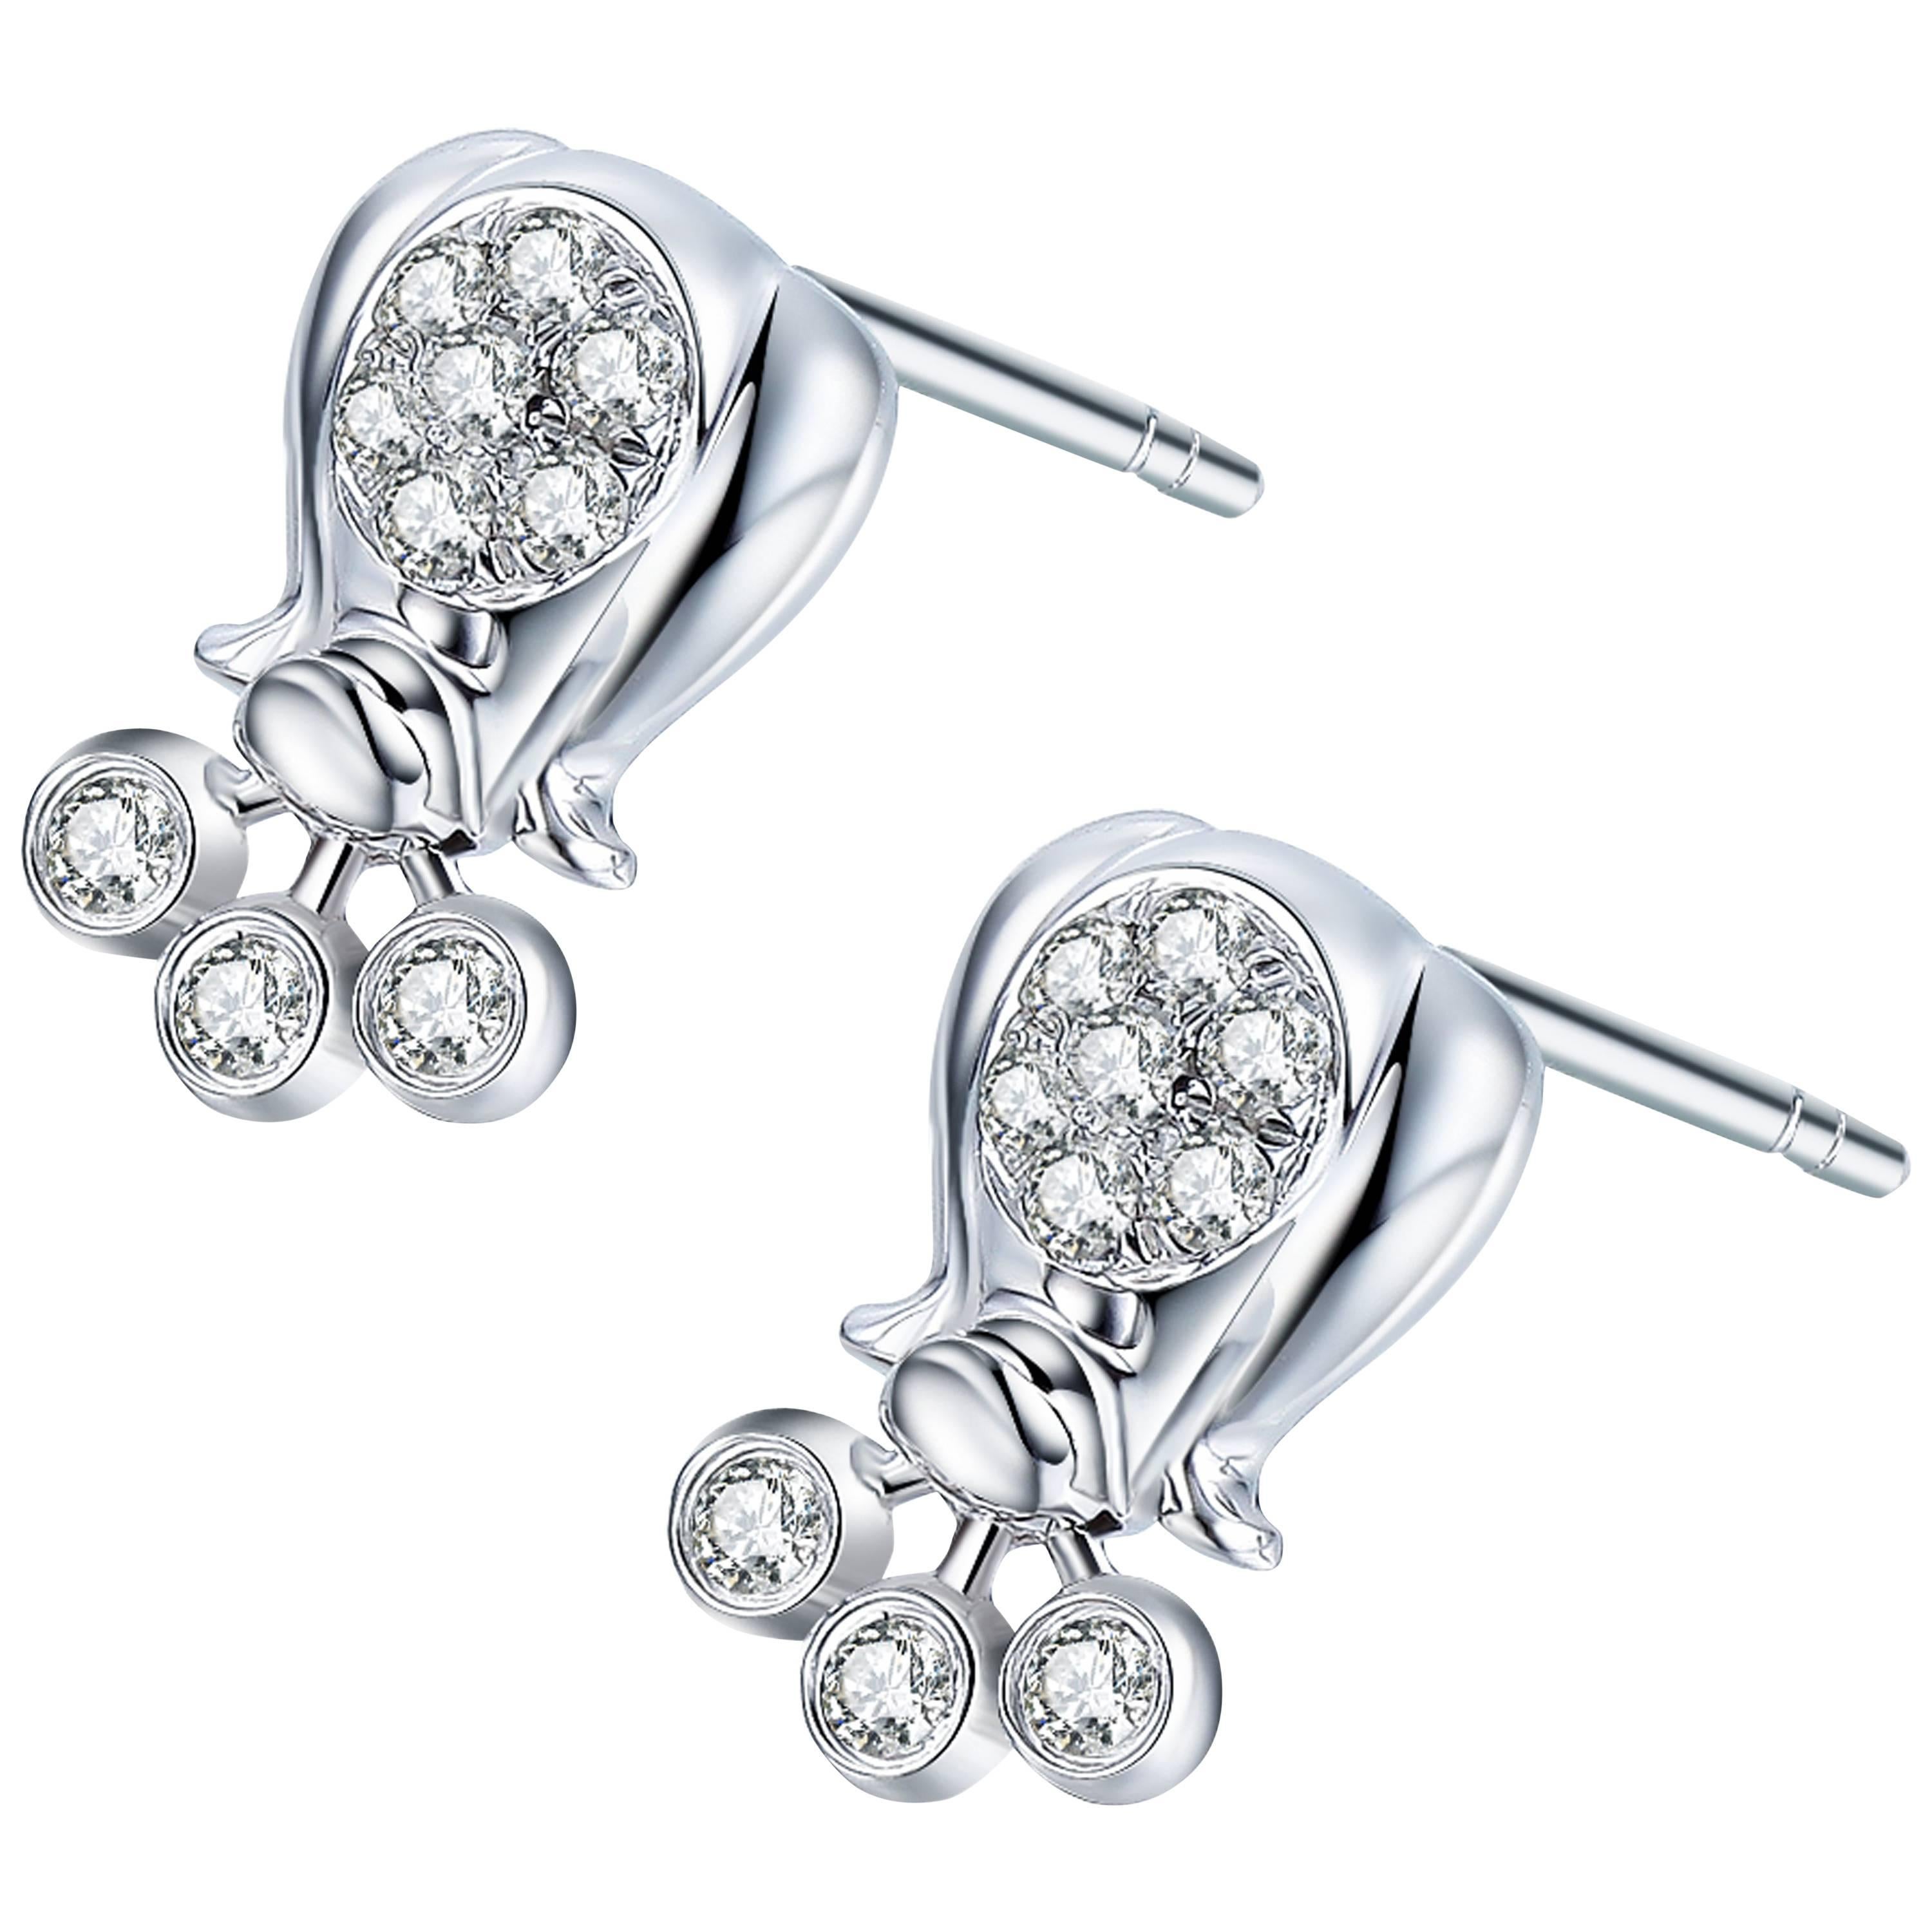 Description:
Lily of the Valley stud earrings with 0.182ct white diamonds, set in 9ct white gold with a high polish.

Inspiration:
The lily of the valley flower is one of the most beloved, opulent wedding flowers, which symbolises purity and